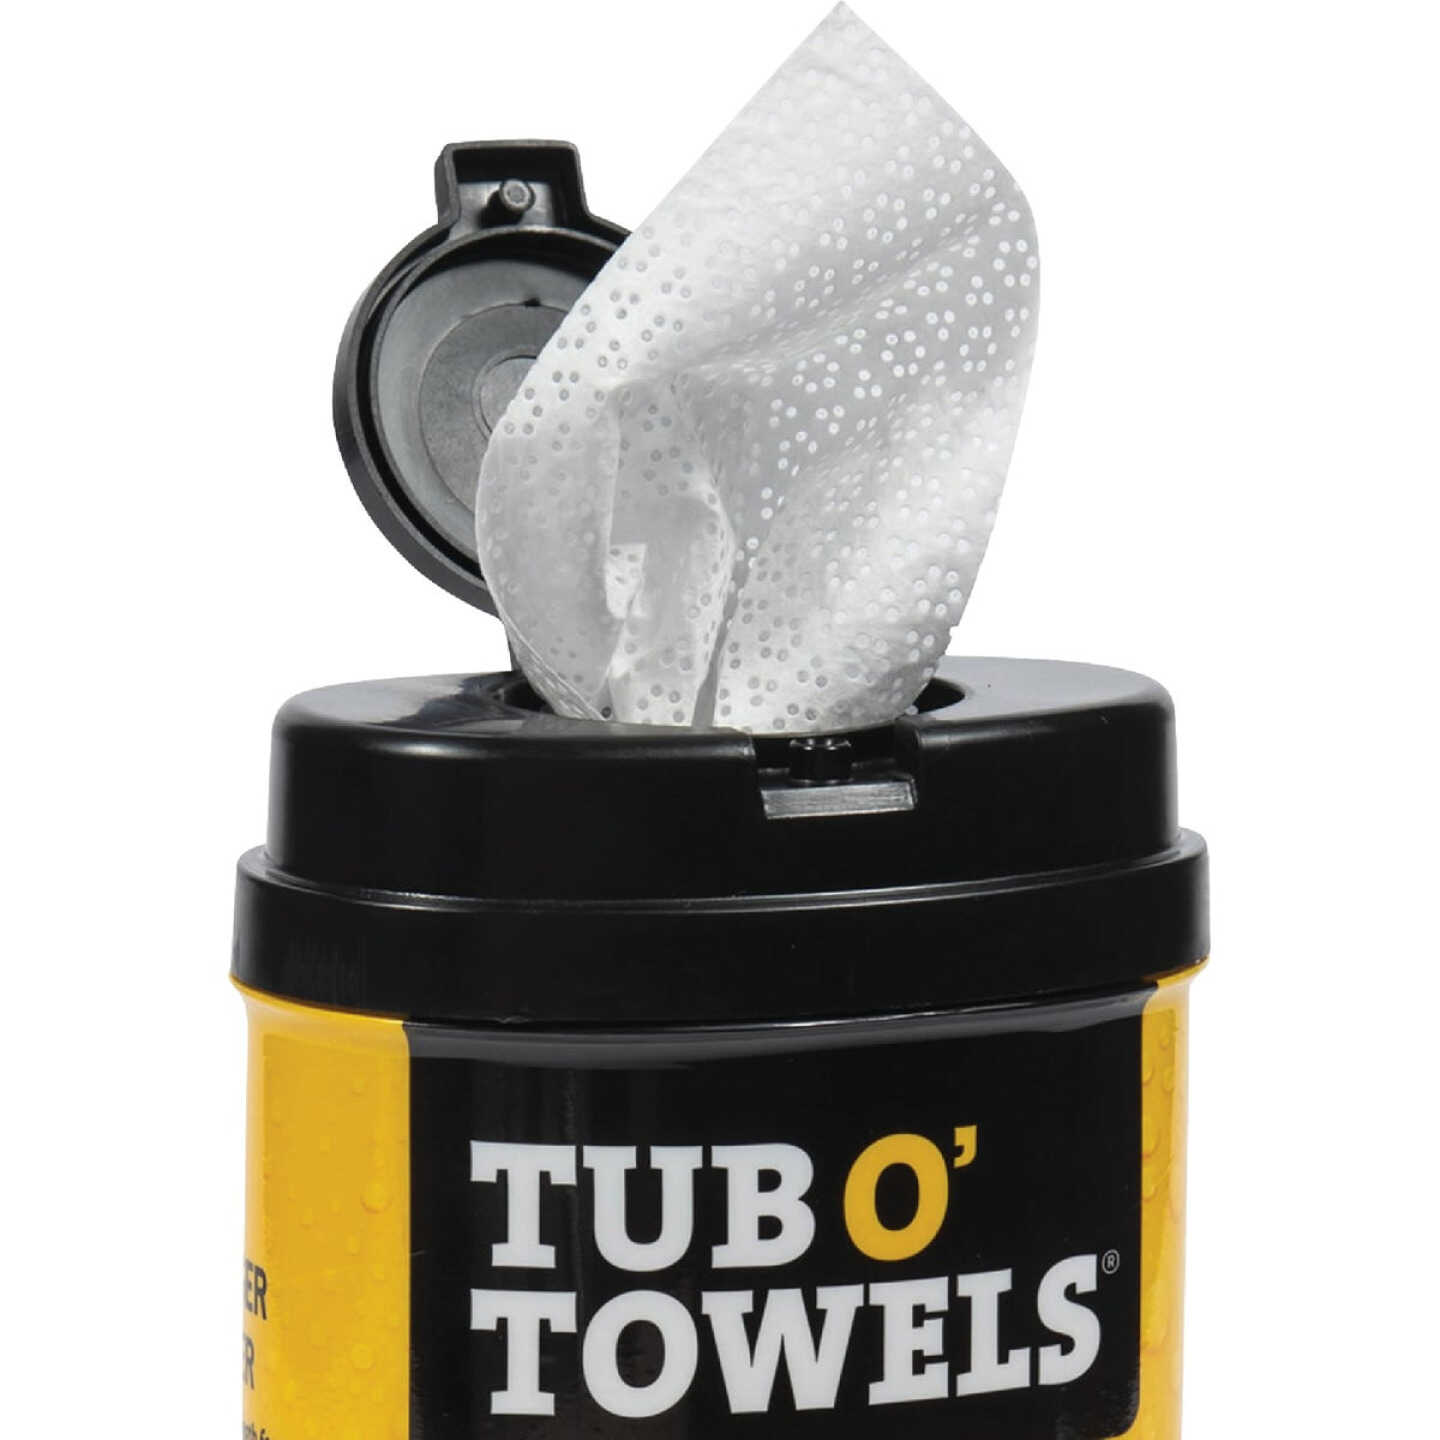 Tub O' Towels TW01-6 - Heavy Duty Multi-Surface Cleaning Wipes